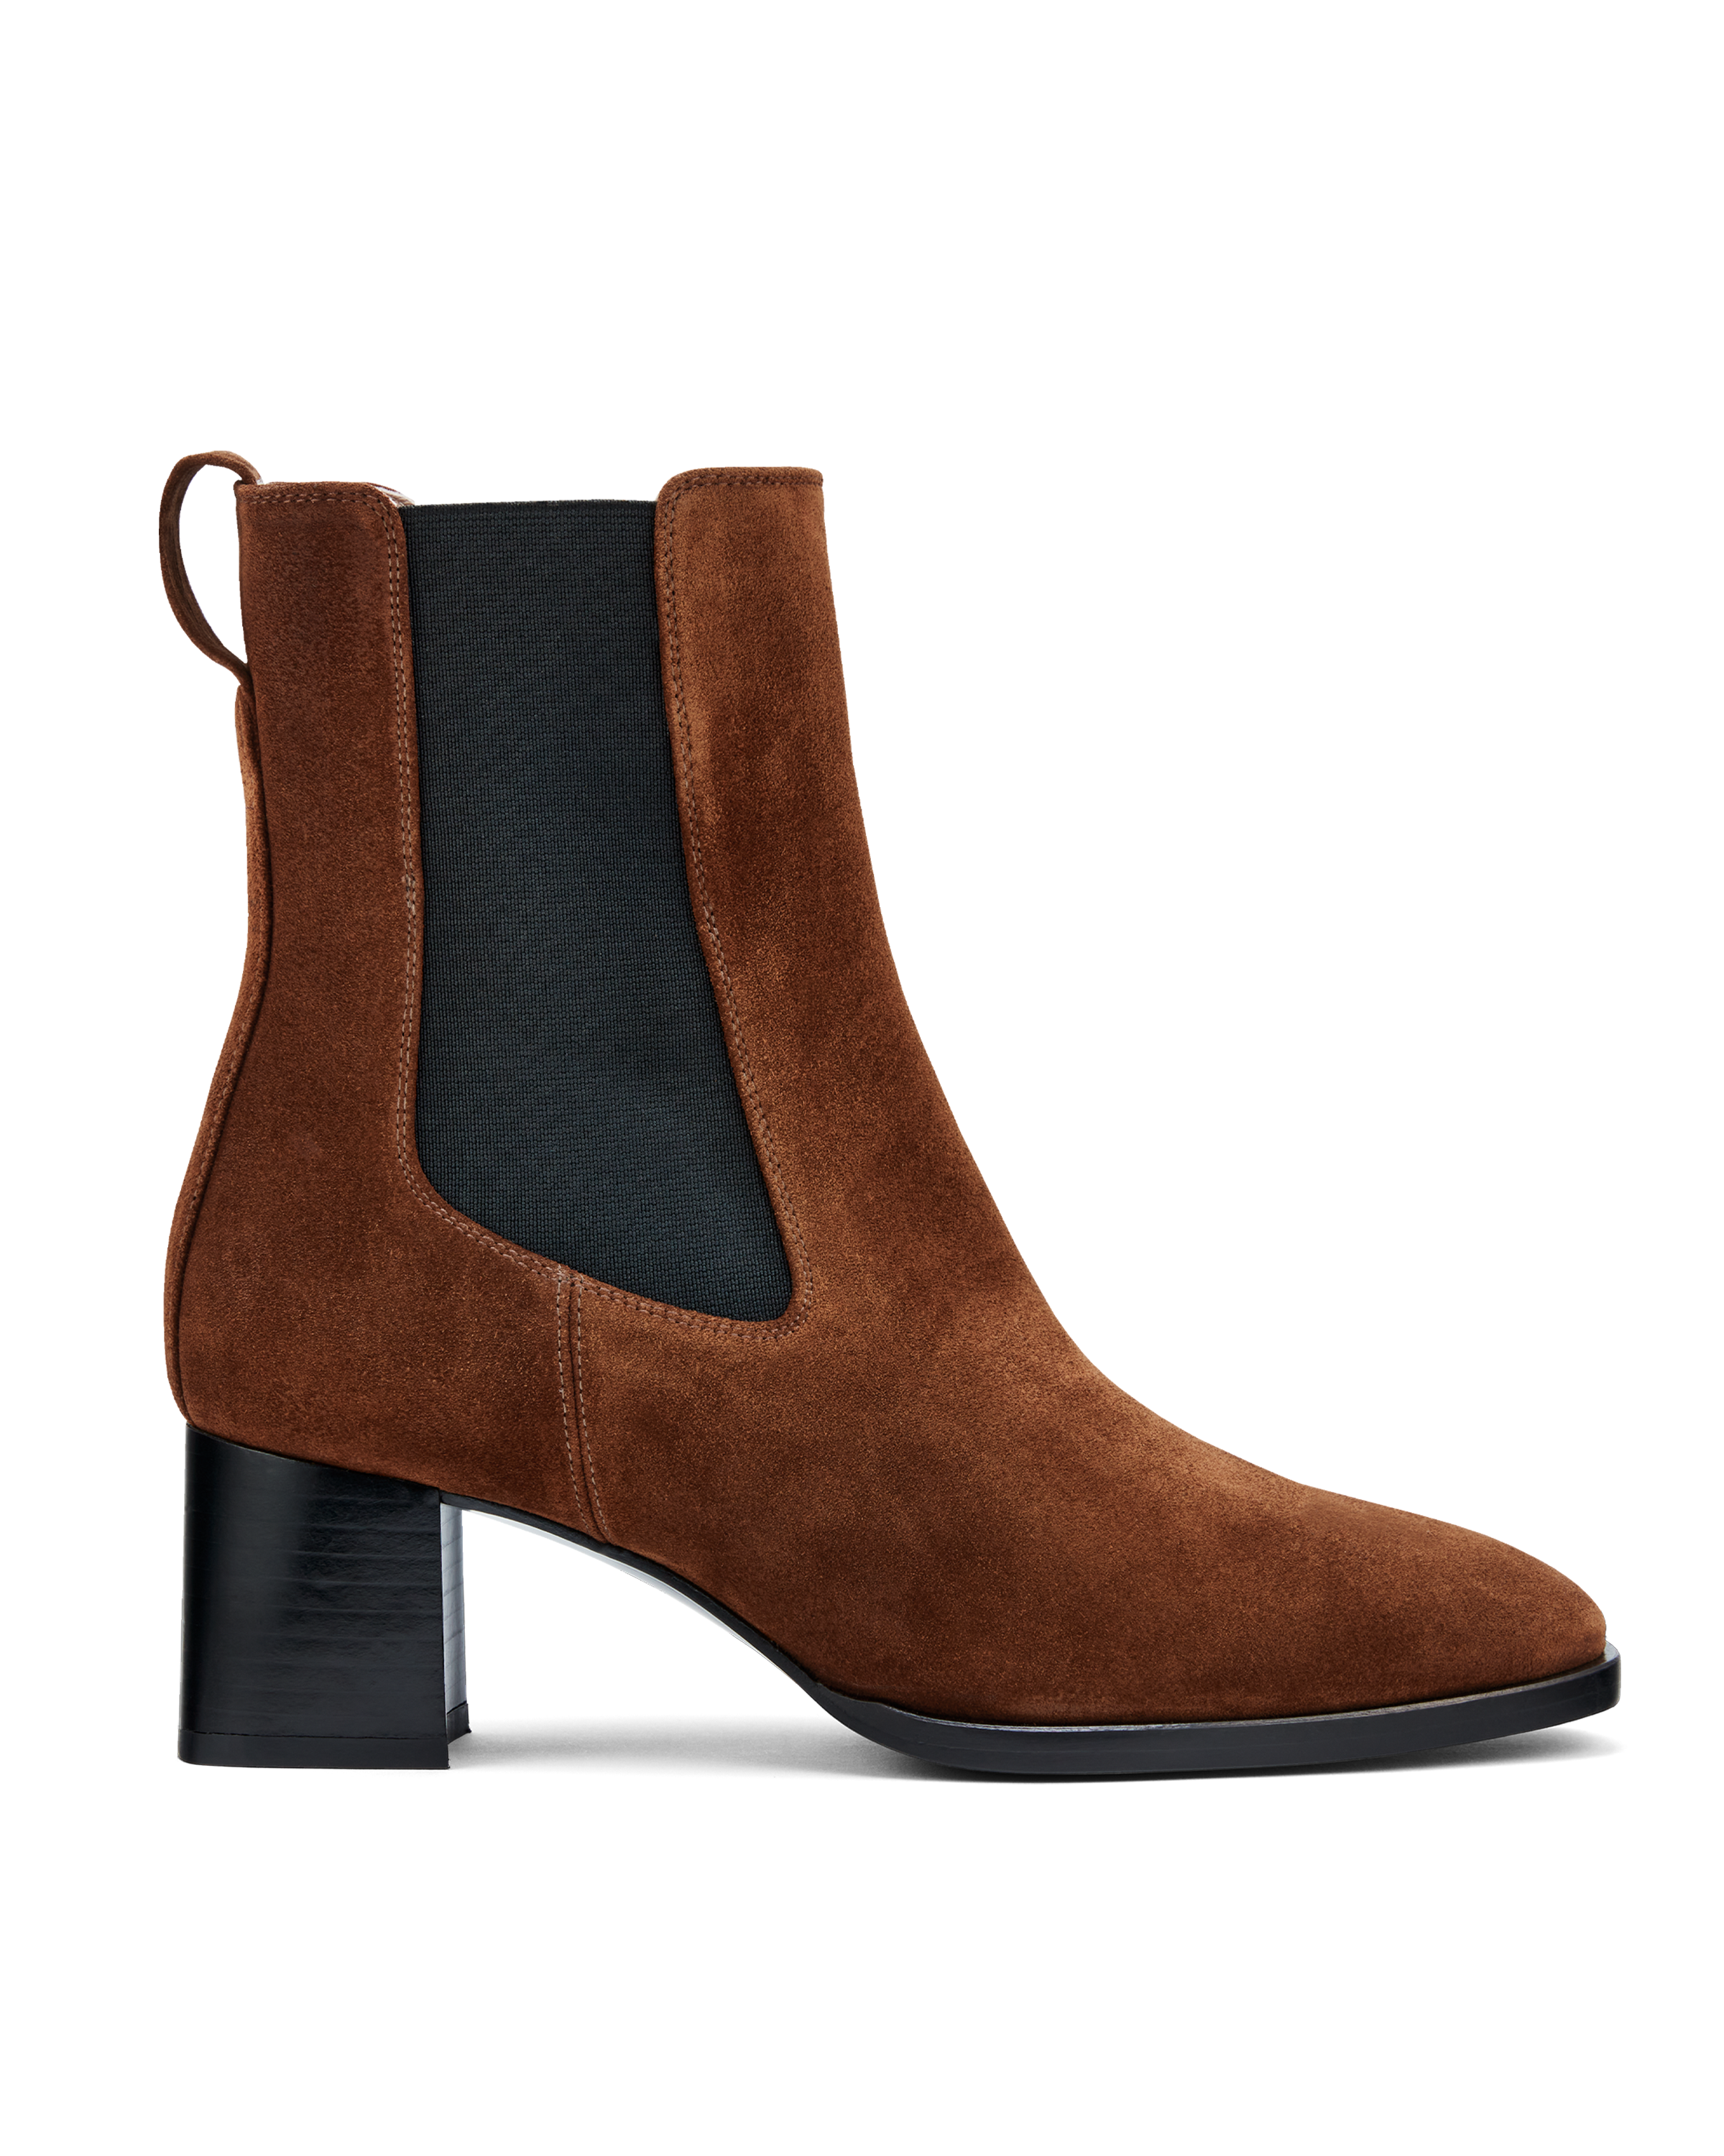 55mm Reachi Leather Ankle Boots